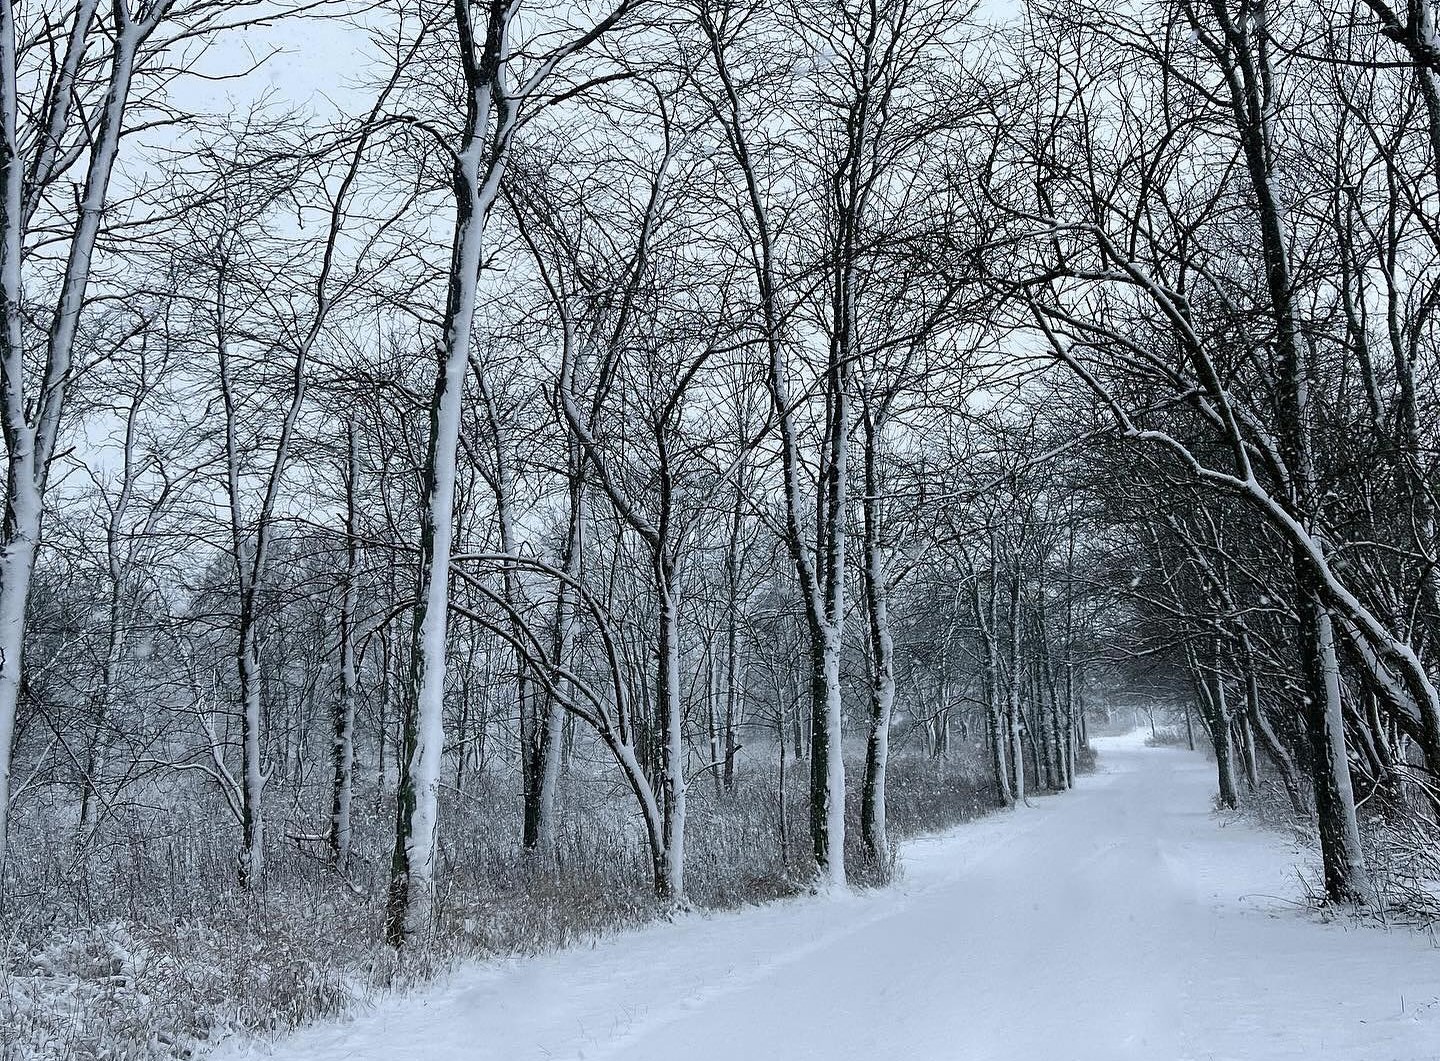 A snowy path with tall trees lining either side.